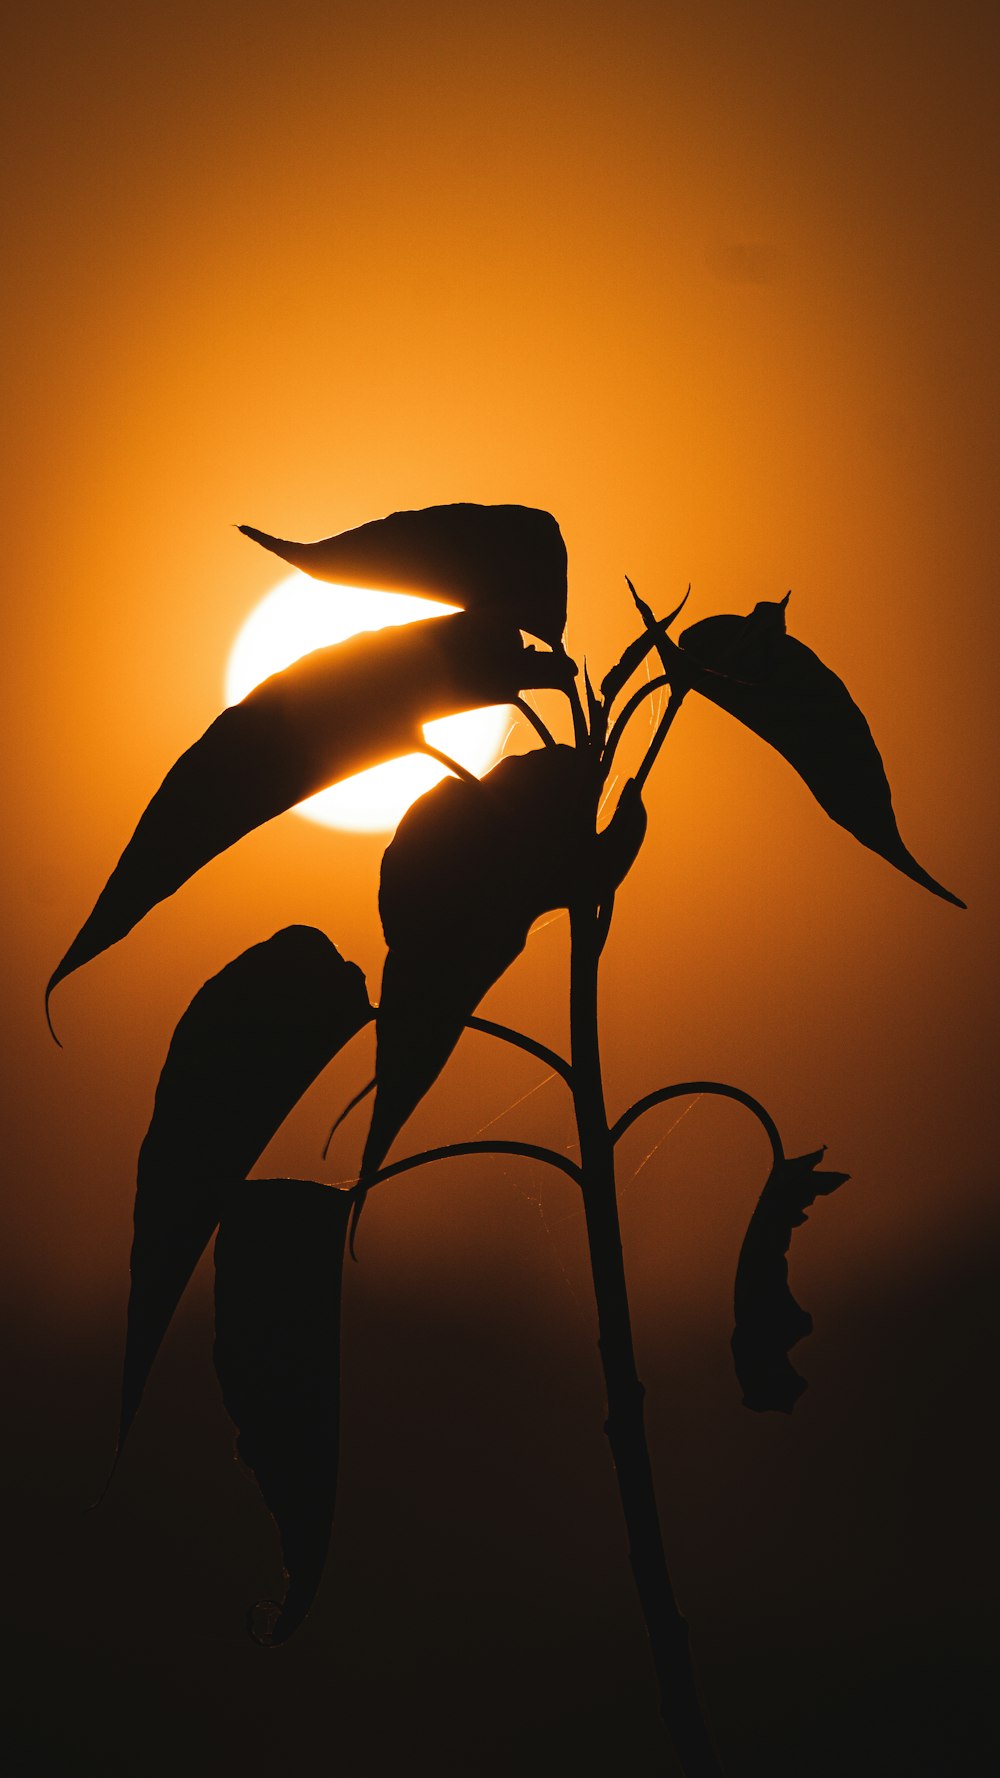 the sun is setting behind a silhouette of a plant